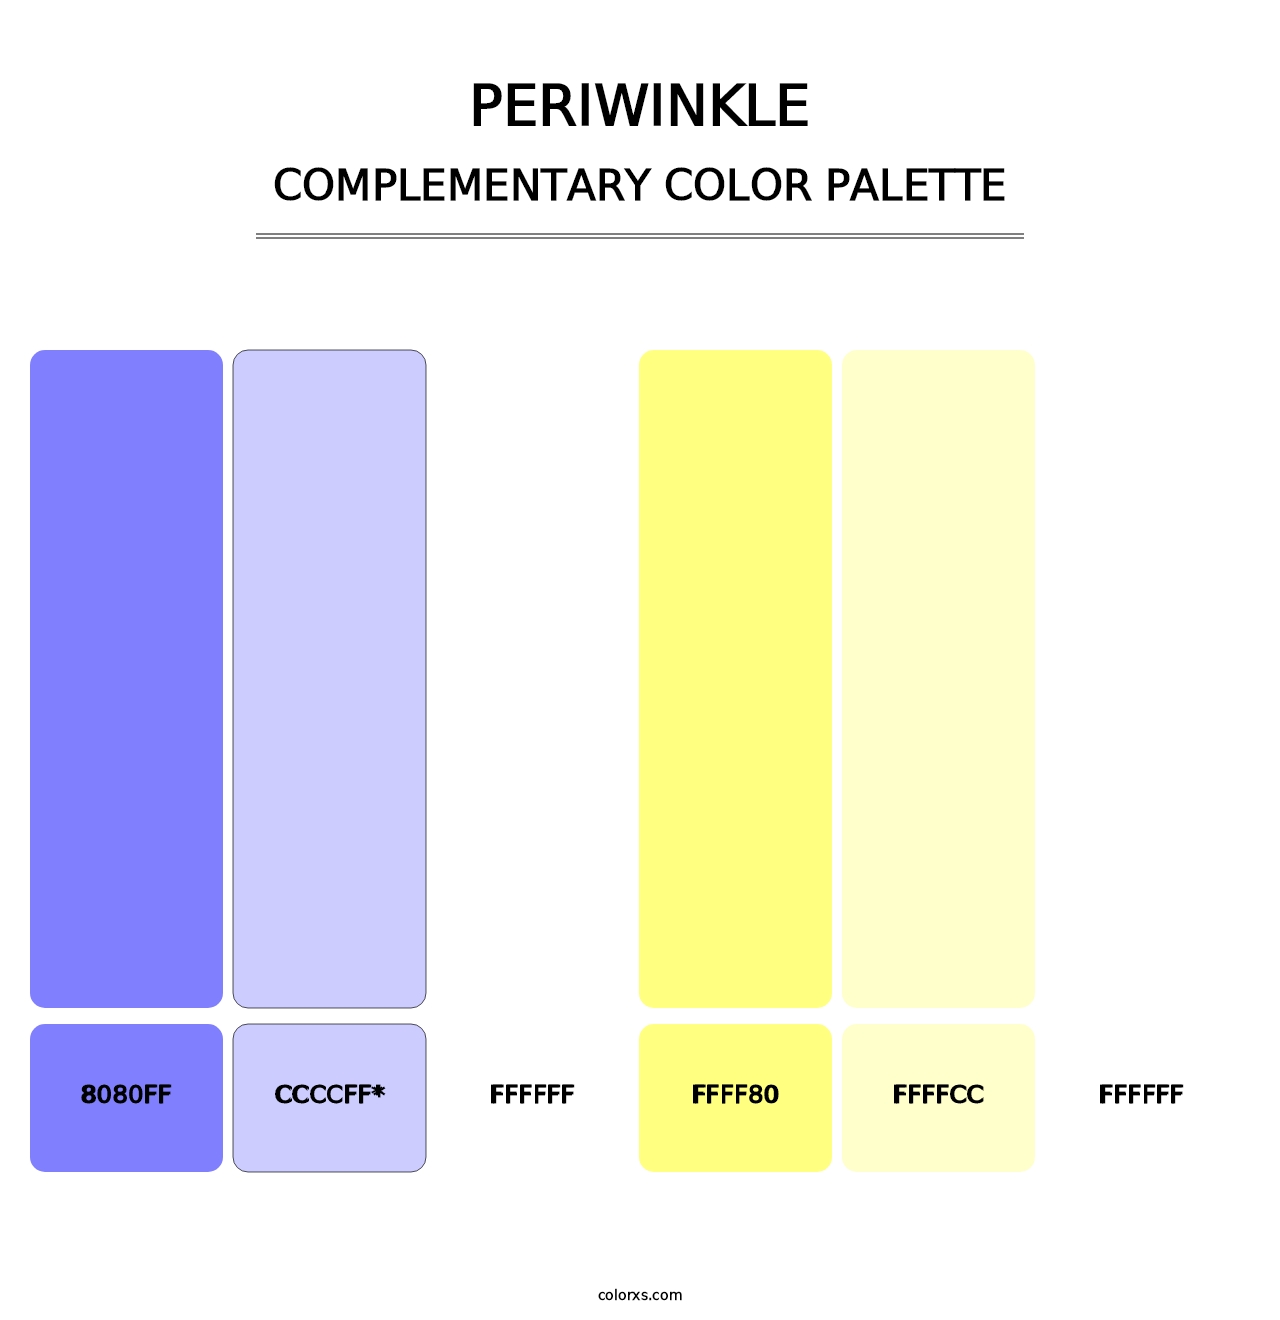 Periwinkle - Complementary Color Palette